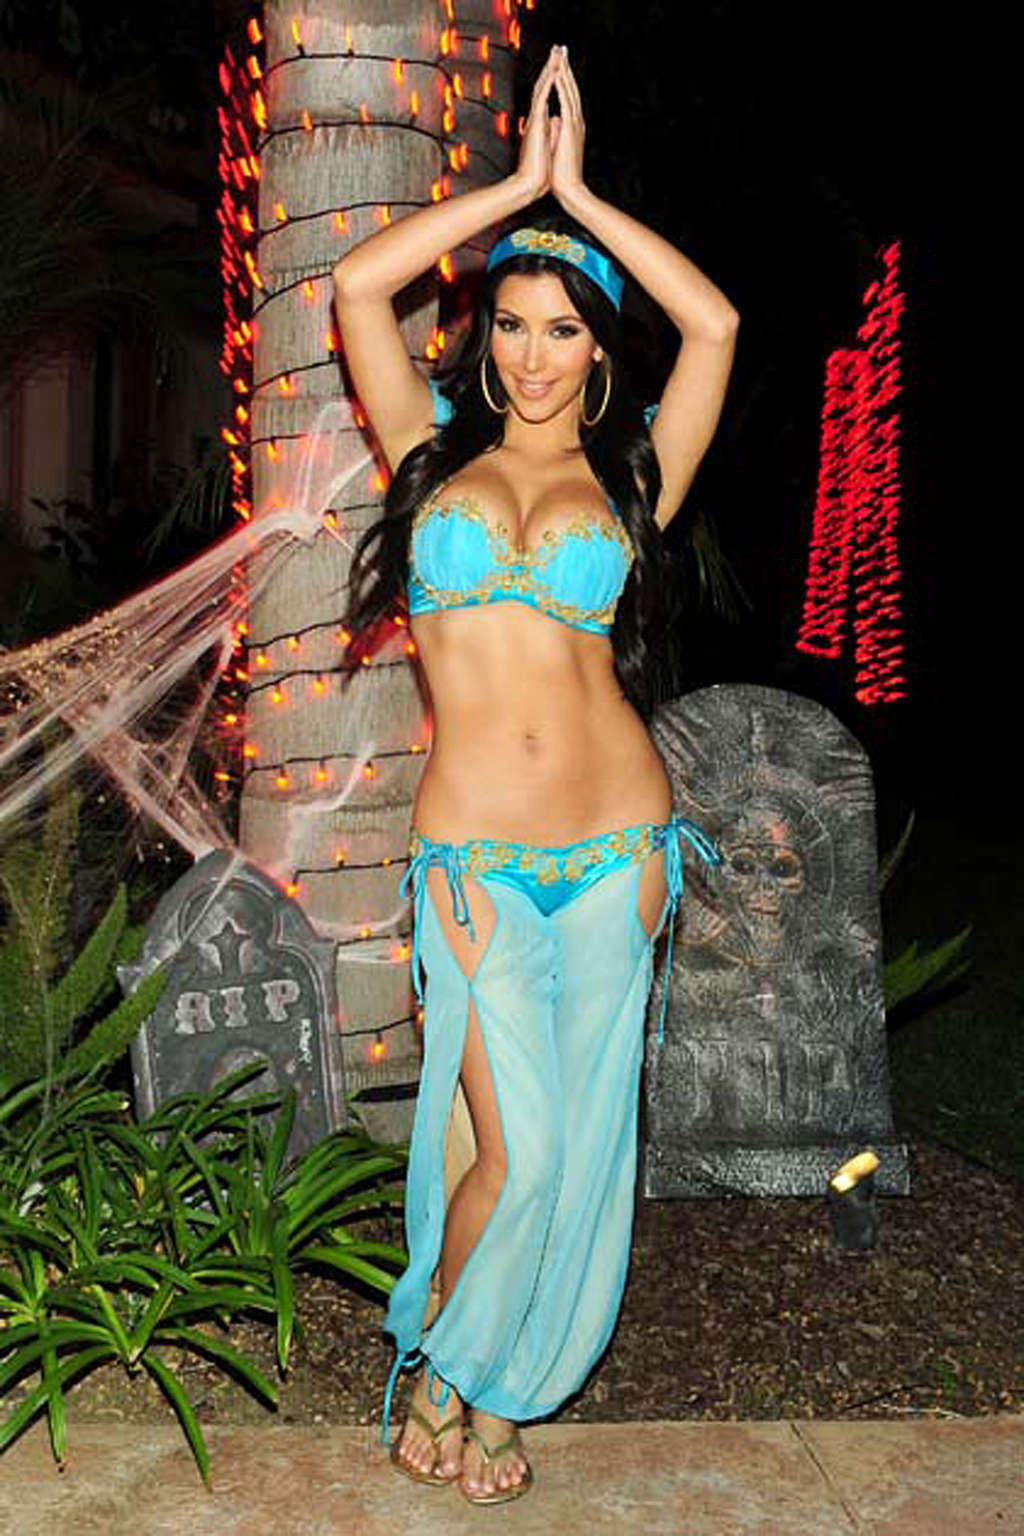 Kim Kardashian looking sexy in helloween costume and showing her tits #75375547